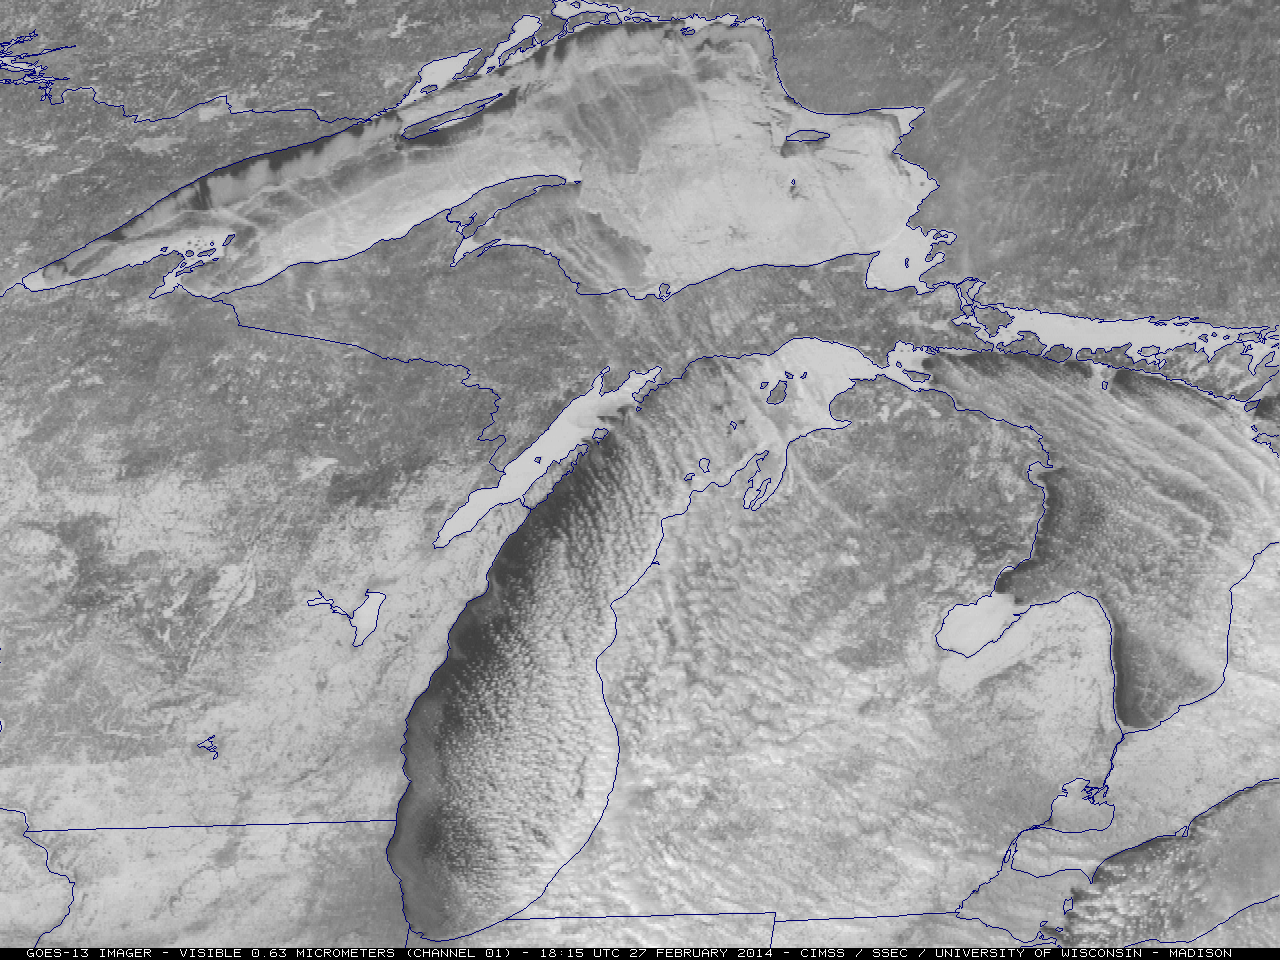 GOES-13 Visible <em>(0.63 µm)</em> images [click to play animation]